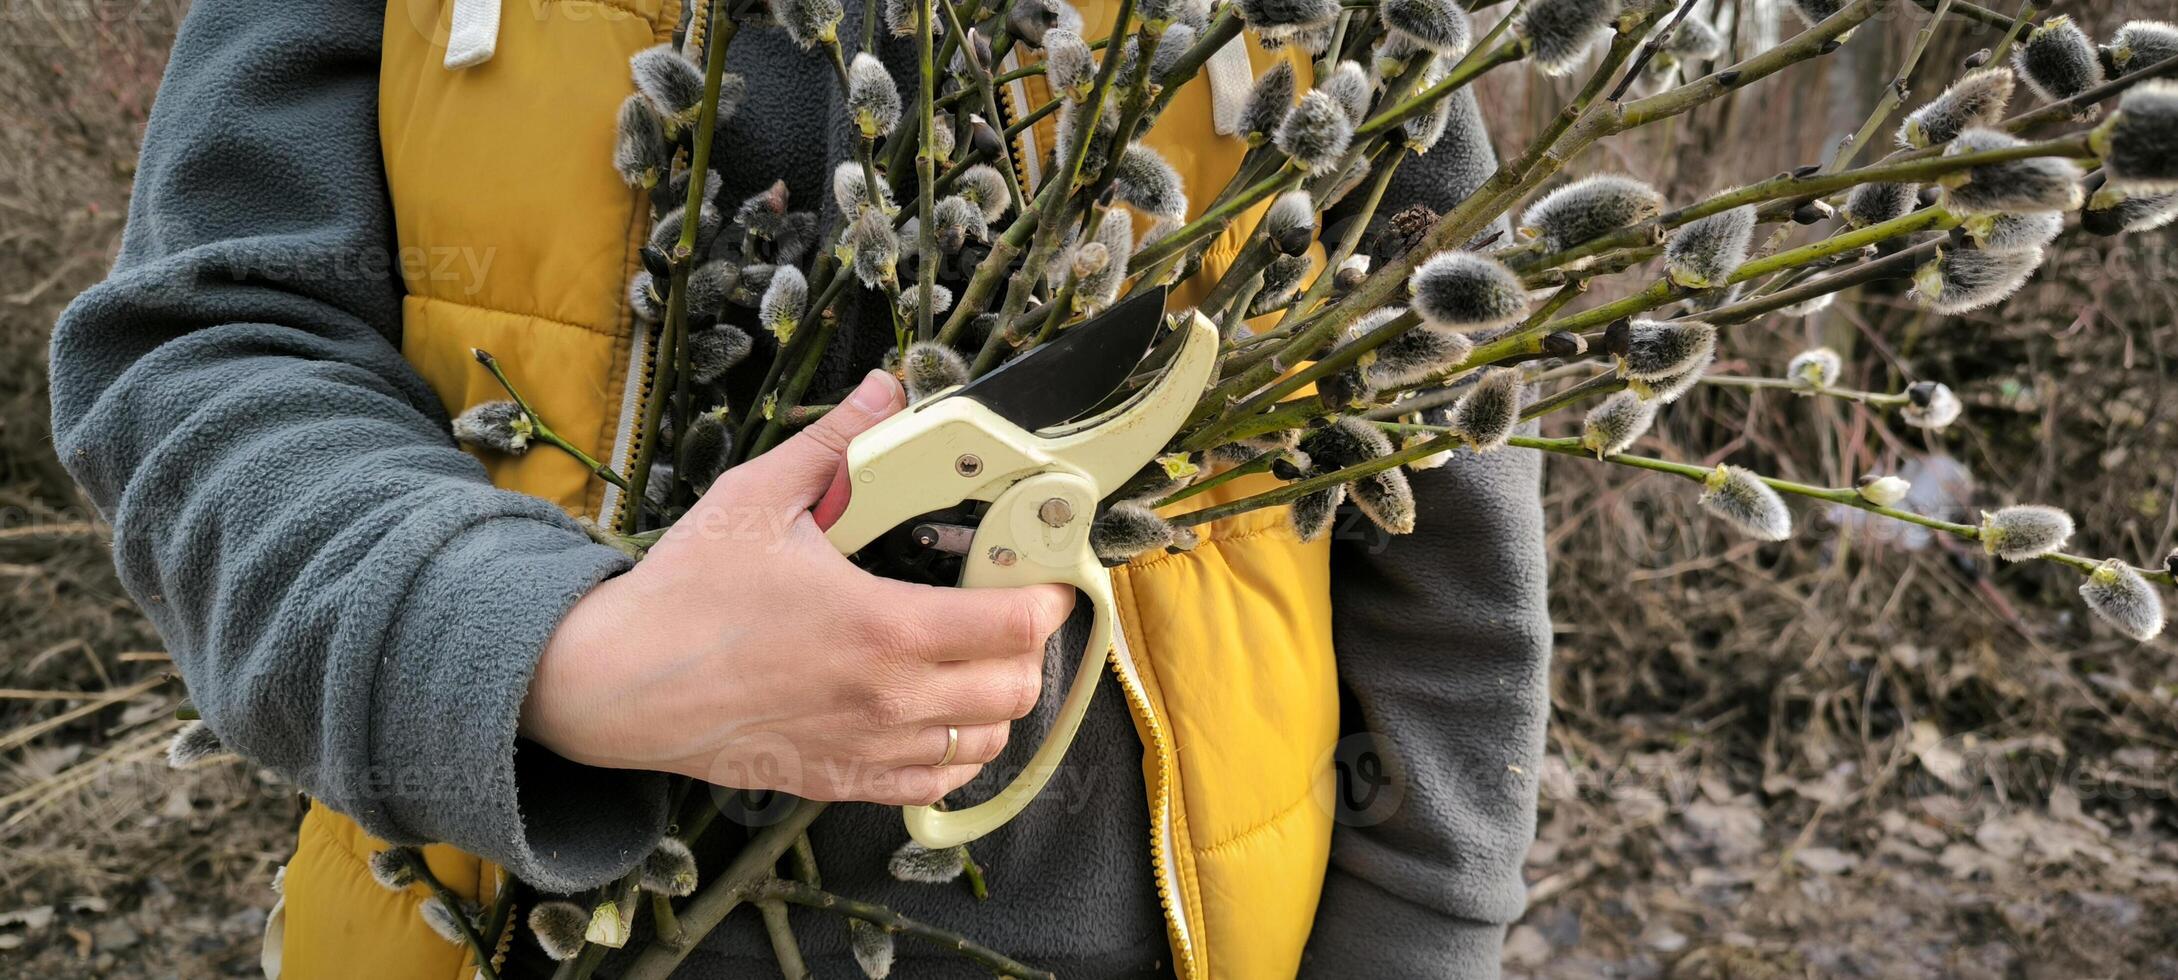 woman holding garden pruner and branches willow yellow vest farm gardening spring bouquet outdoors ecological agriculture photo